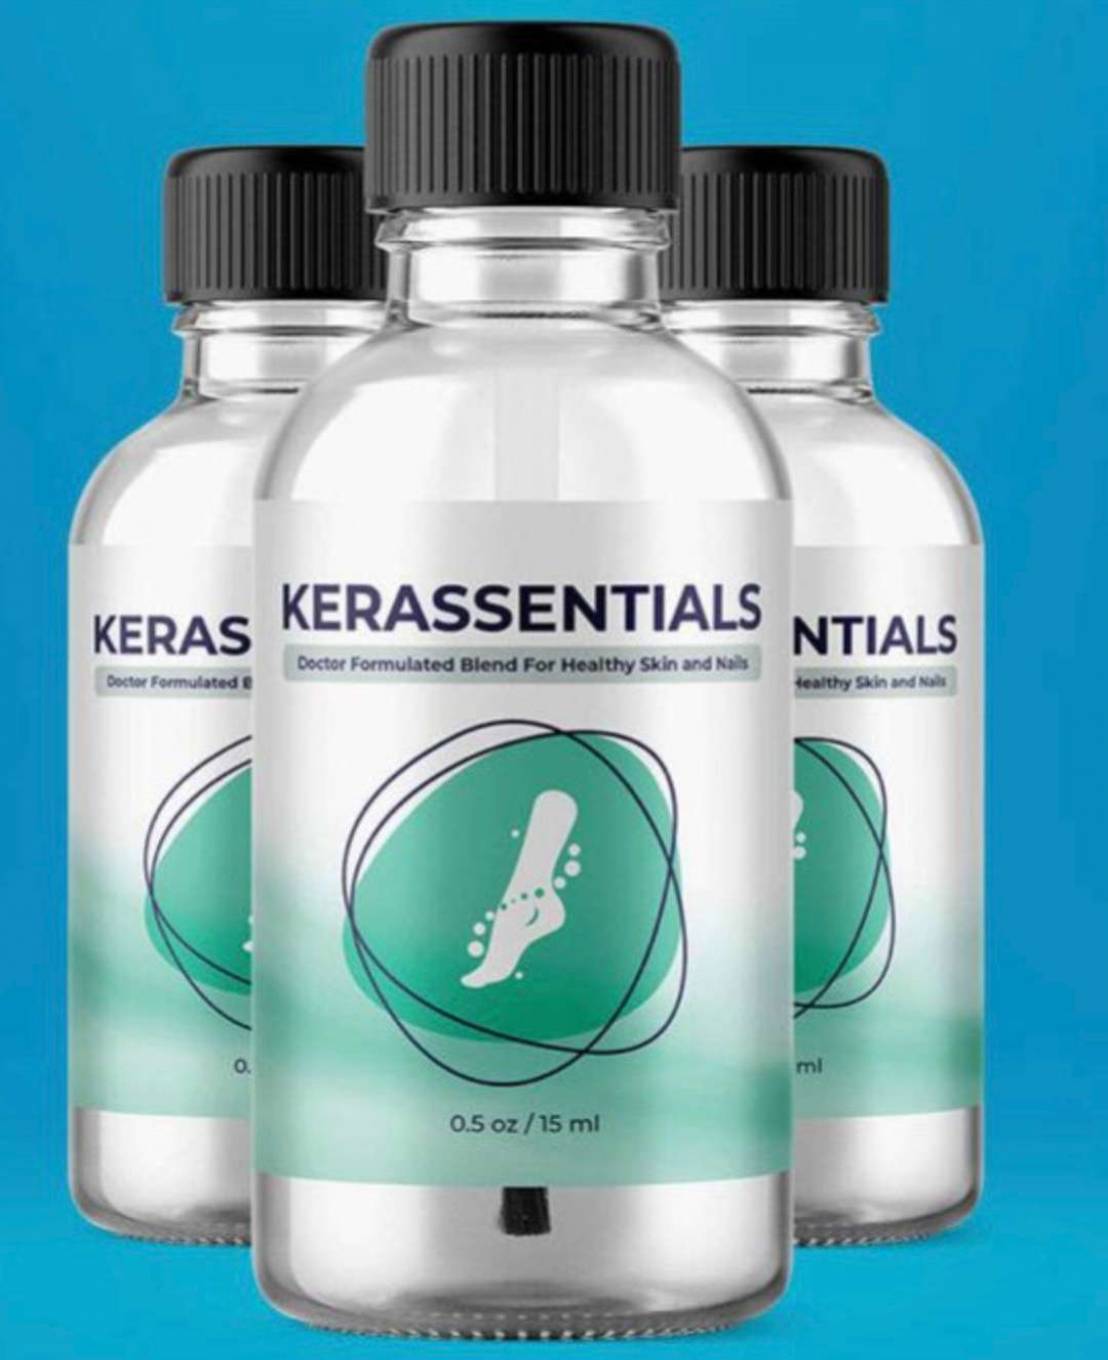 What Are Some Reviews Of Kerassentials